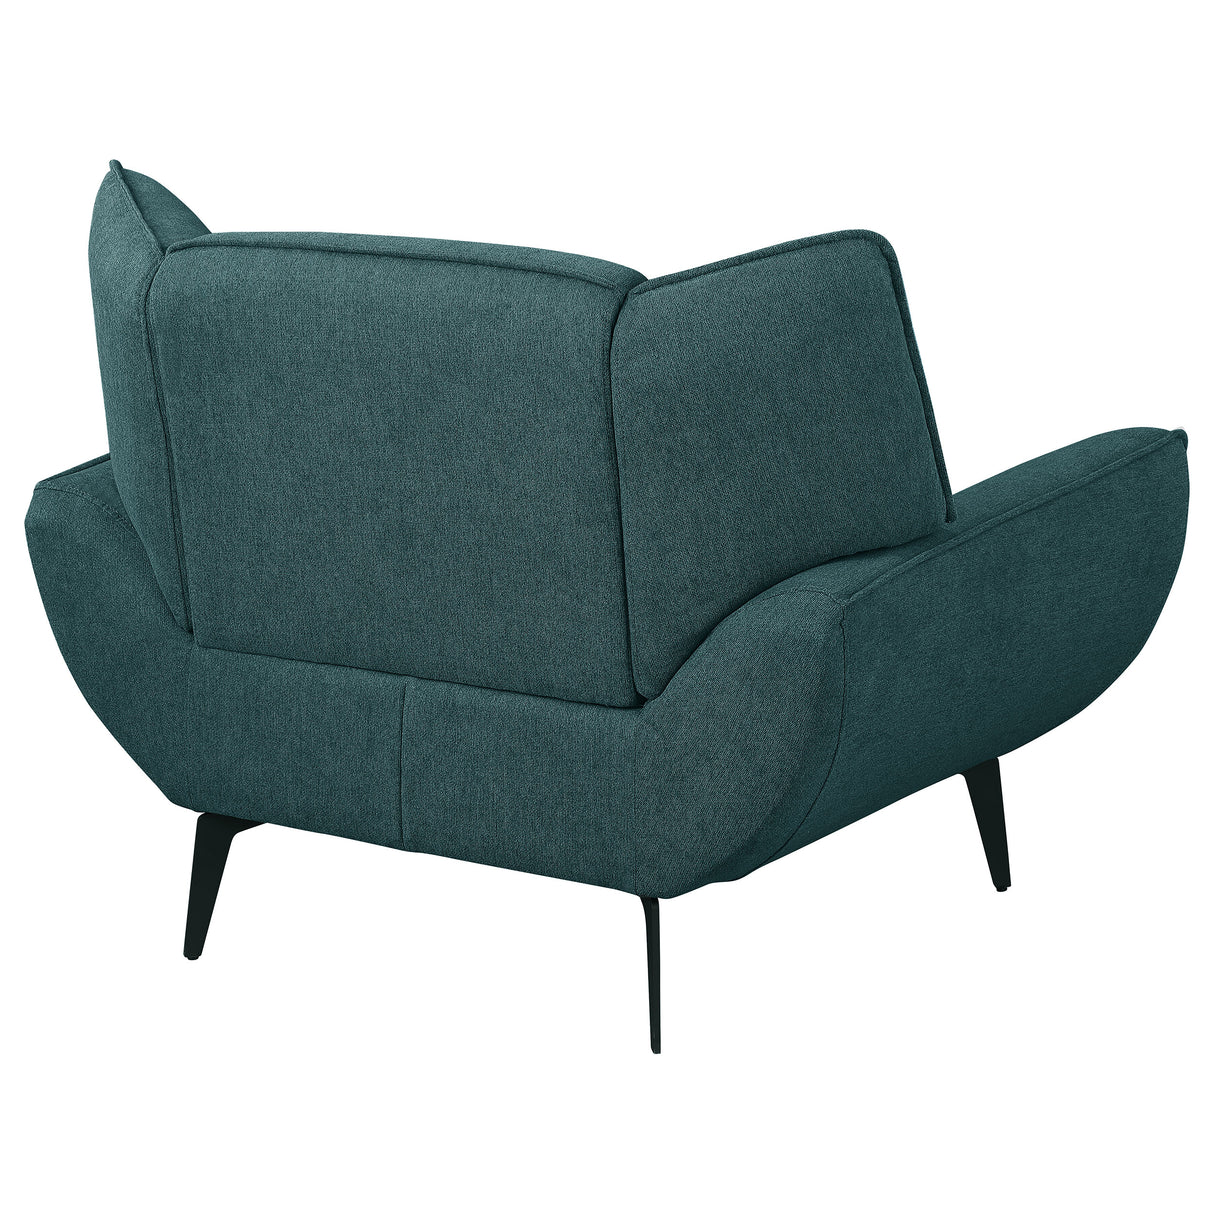 Chair - Acton Upholstered Flared Arm Chair Teal Blue